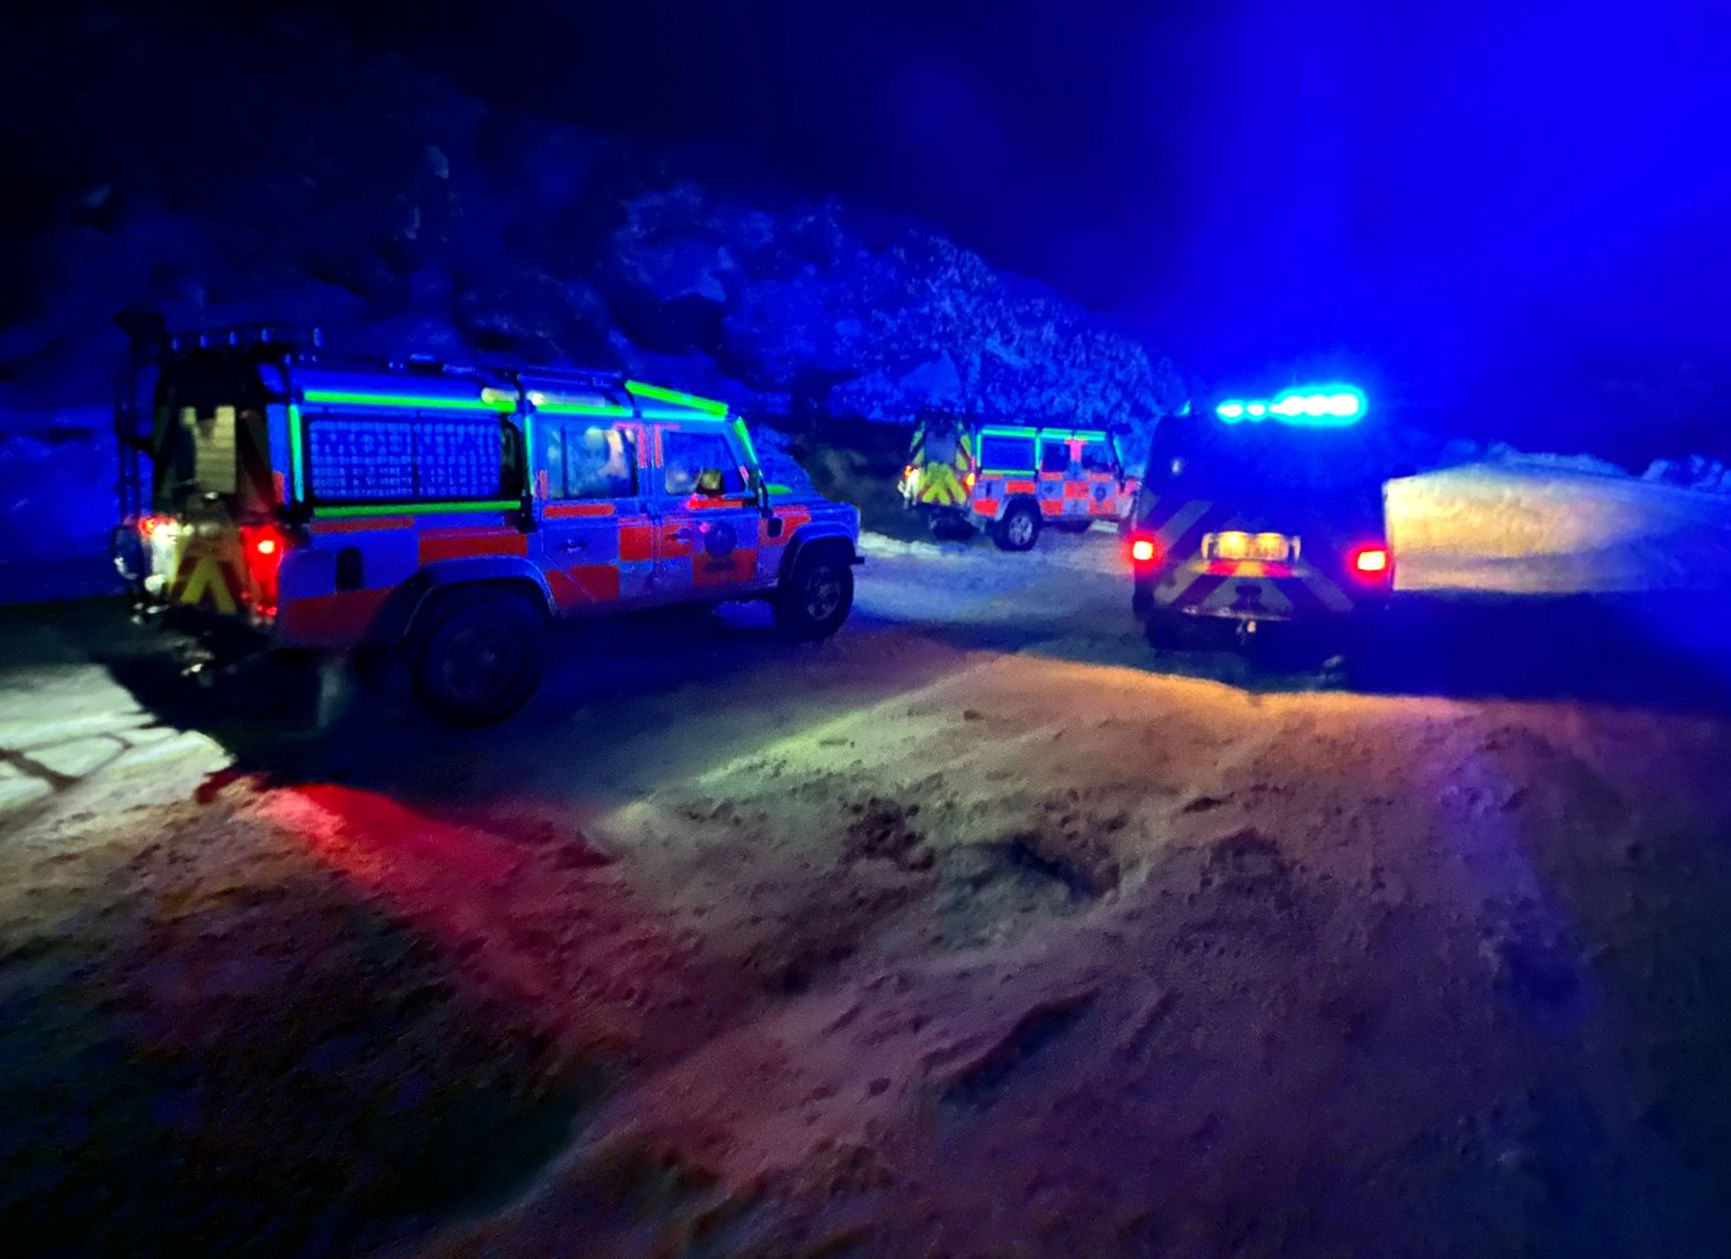 BLUE LIGHTS AND AUDIBLE WARNINGS FOR MOUNTAIN RESCUE VEHICLES